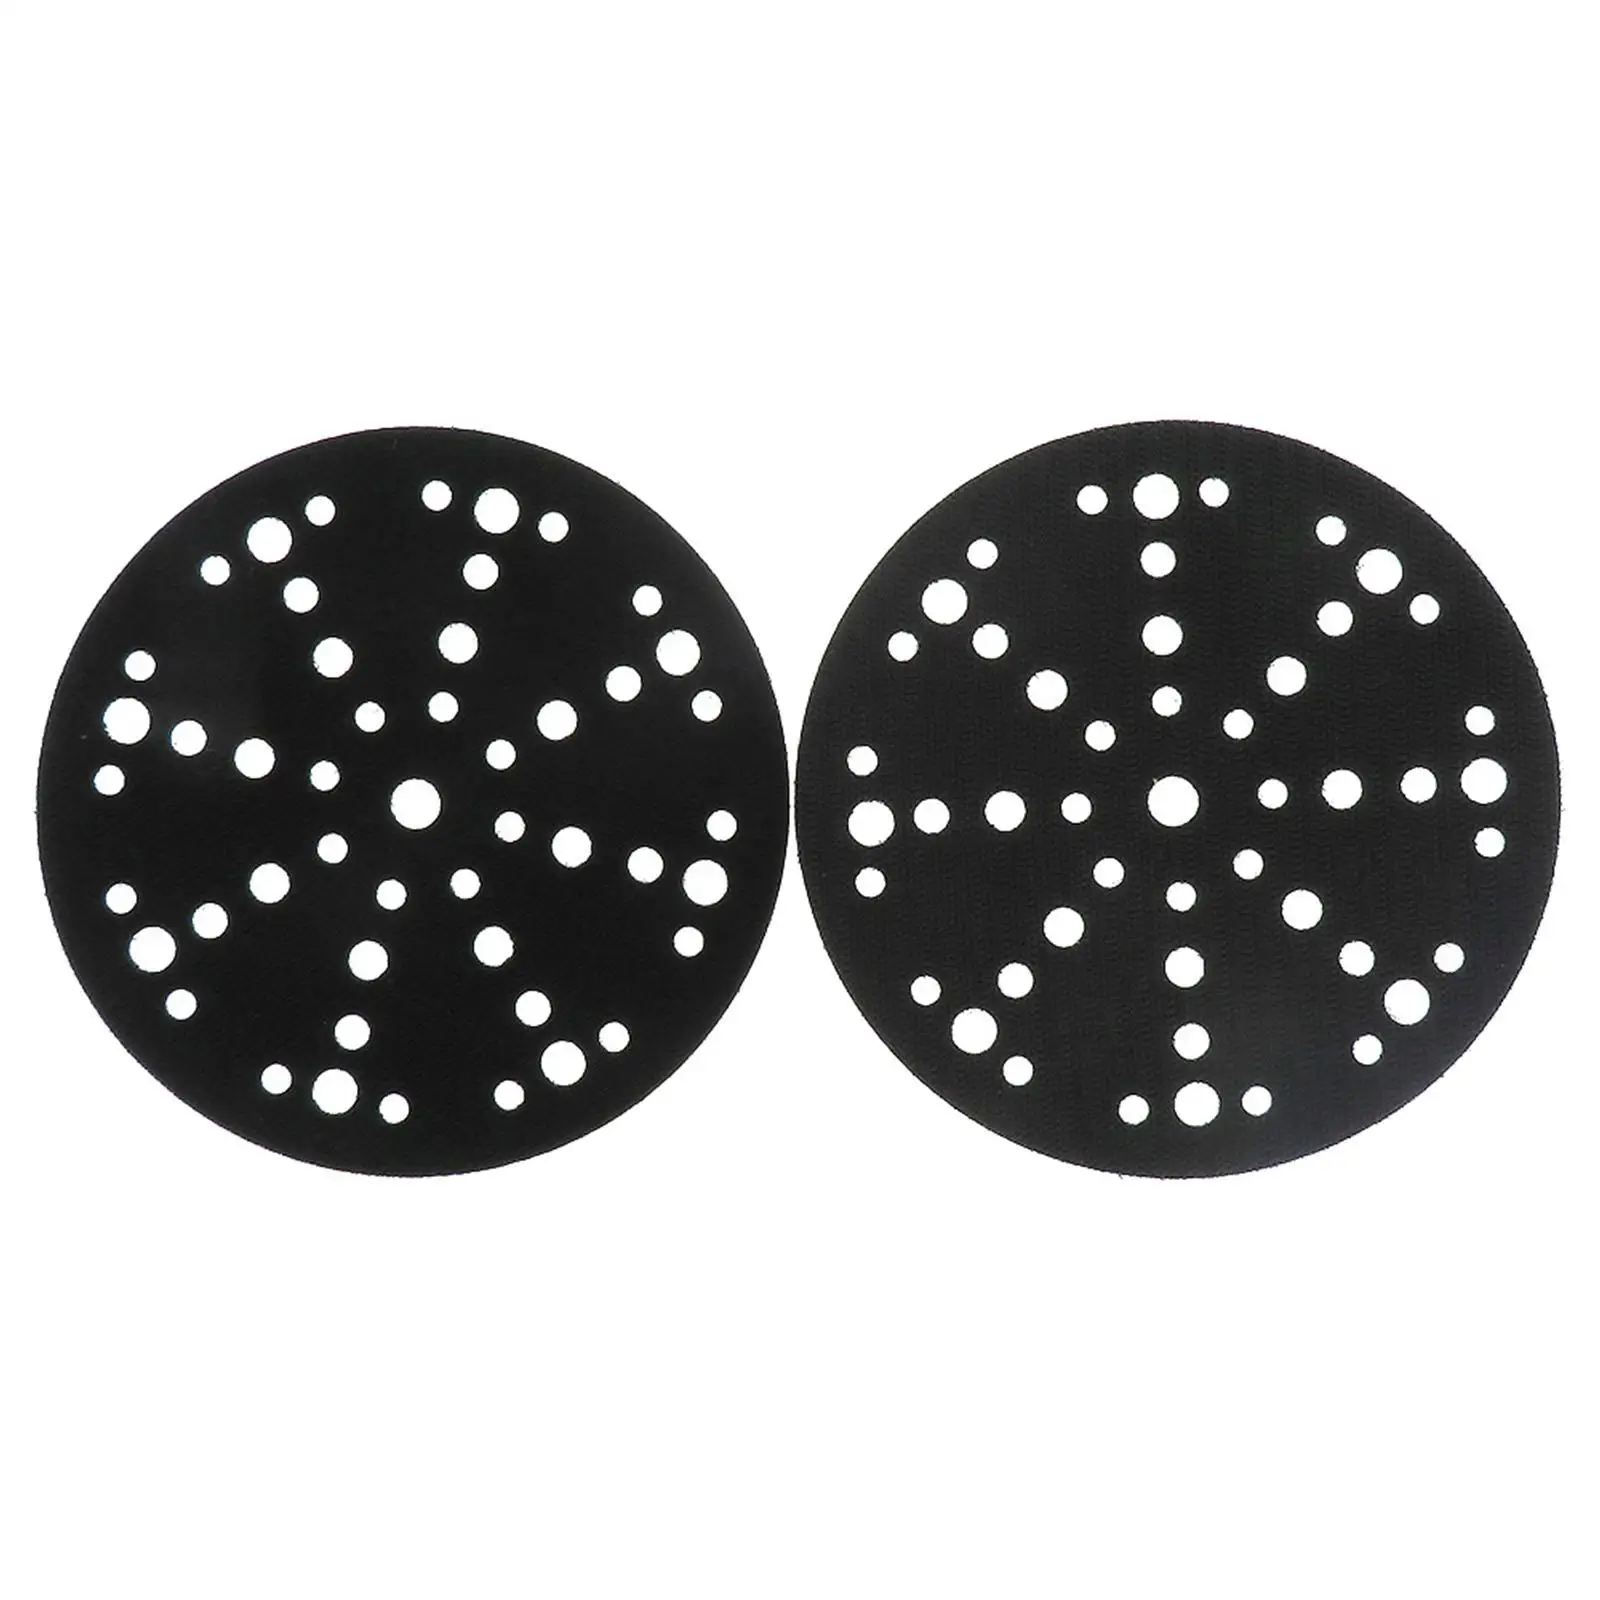 2x Polishing Backing Pads 150mm 48 Hole Durable Polisher Tools Grinding Plates Sander Polisher Tool for Grinder Accessories